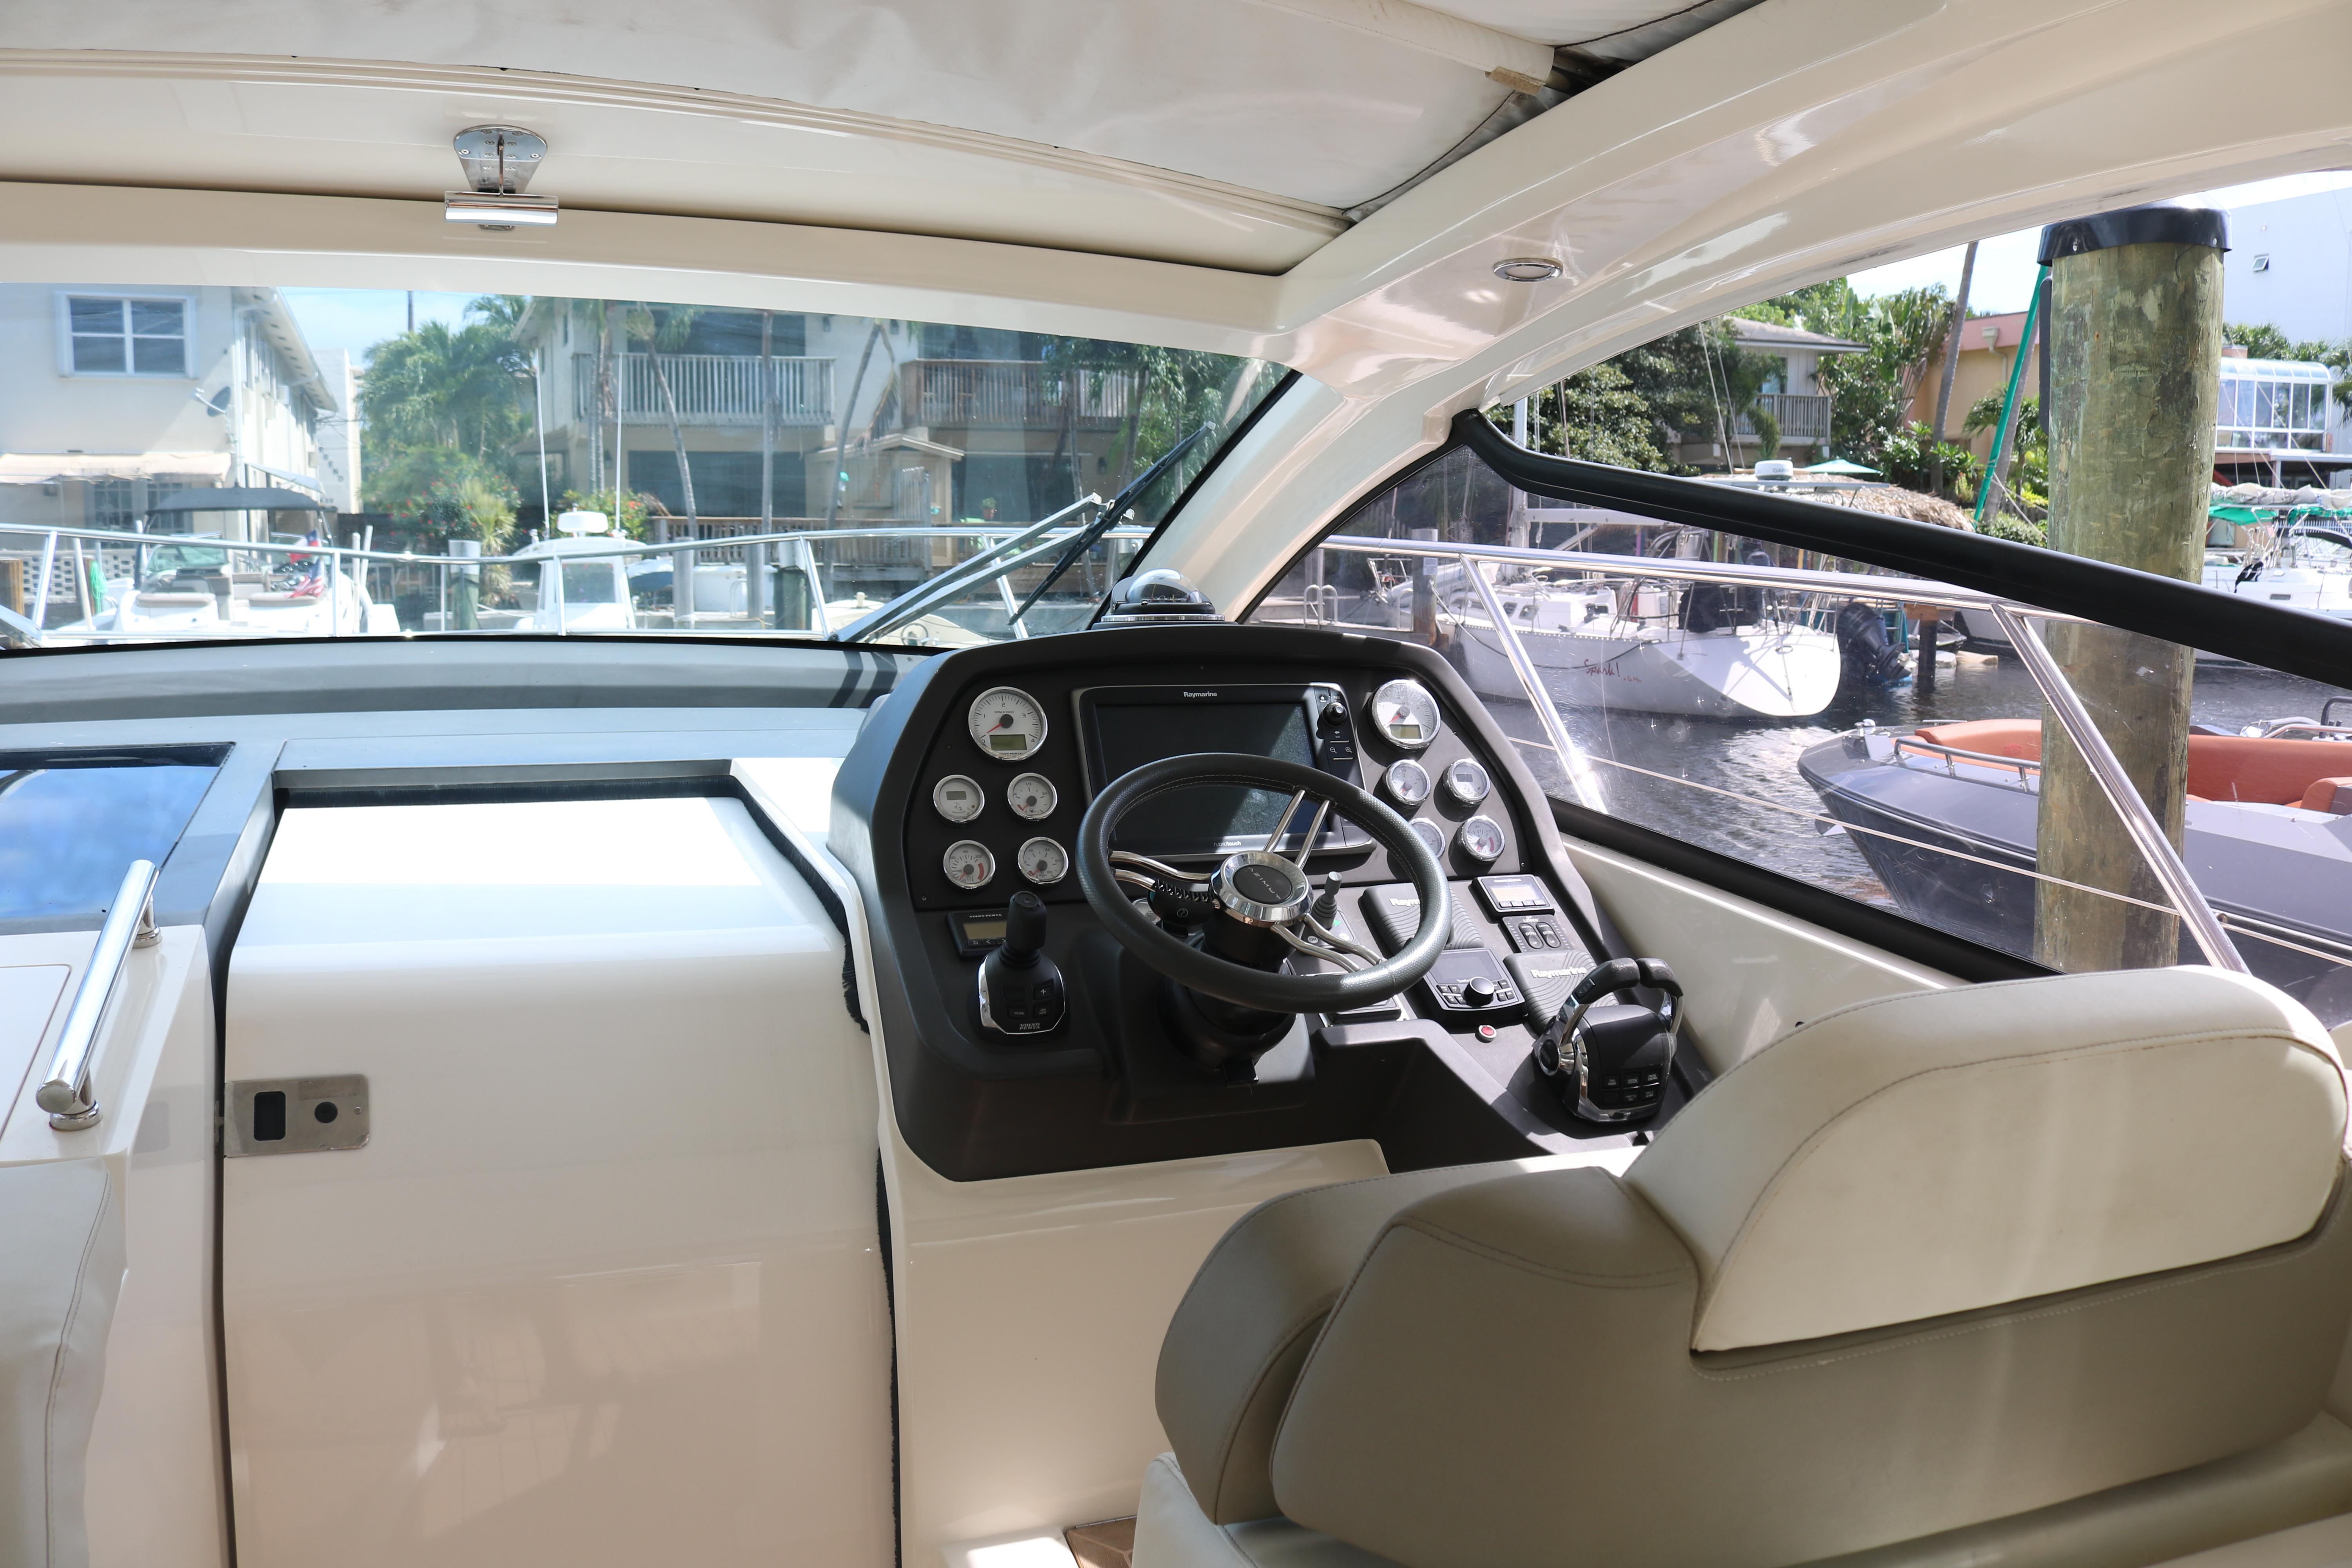 Azimut 38 - Exterior foward seating and helm station on water